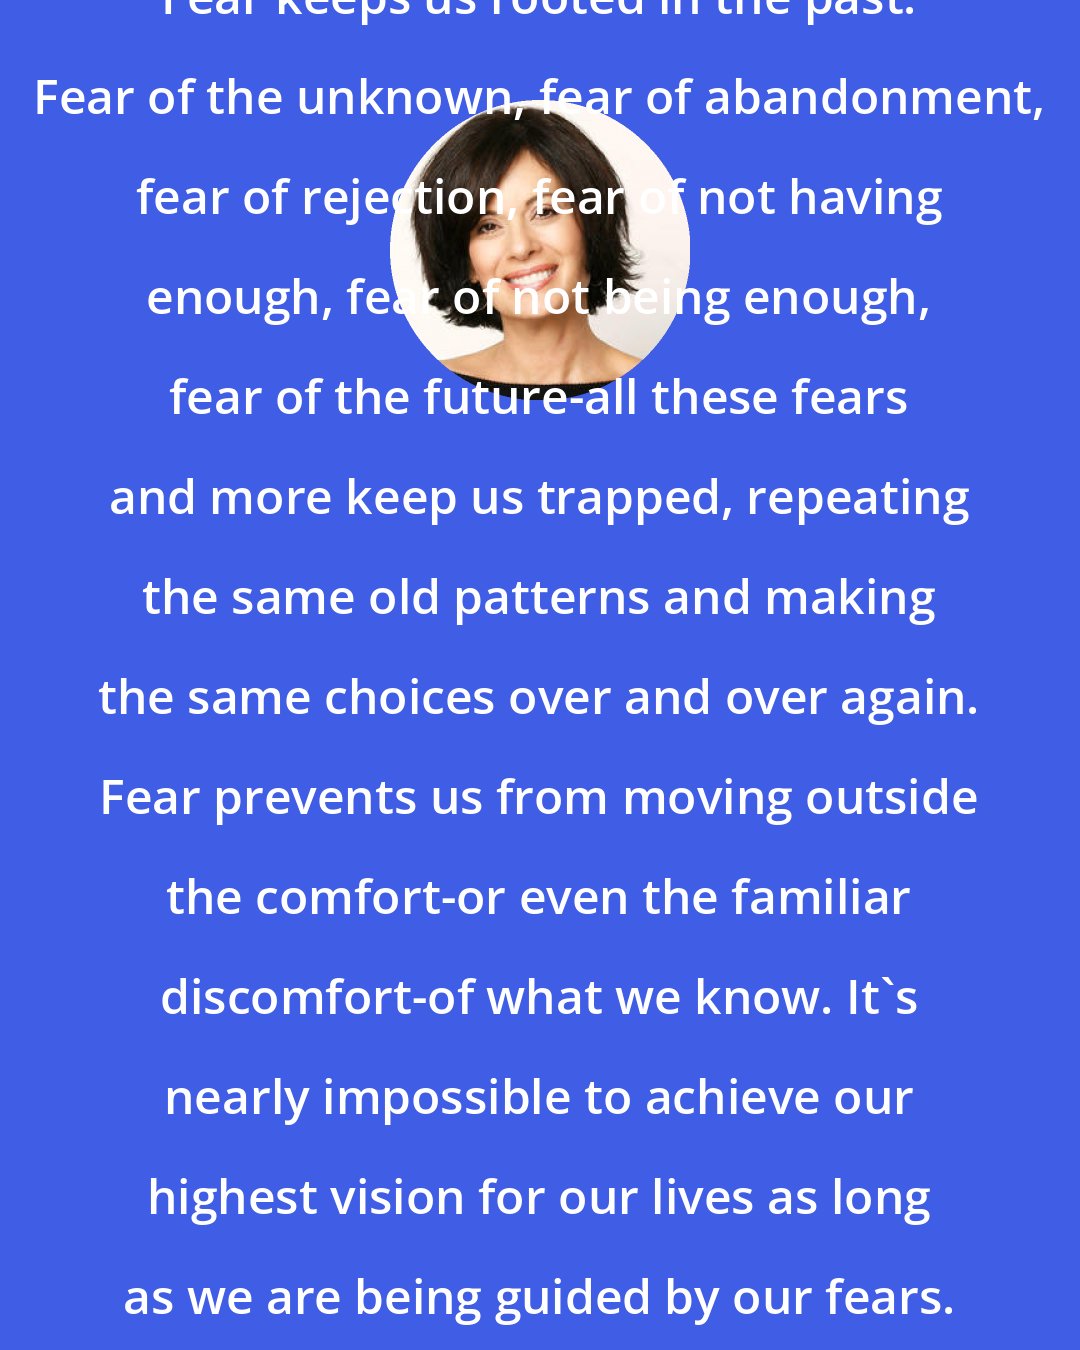 Debbie Ford: Fear keeps us rooted in the past. Fear of the unknown, fear of abandonment, fear of rejection, fear of not having enough, fear of not being enough, fear of the future-all these fears and more keep us trapped, repeating the same old patterns and making the same choices over and over again. Fear prevents us from moving outside the comfort-or even the familiar discomfort-of what we know. It's nearly impossible to achieve our highest vision for our lives as long as we are being guided by our fears.